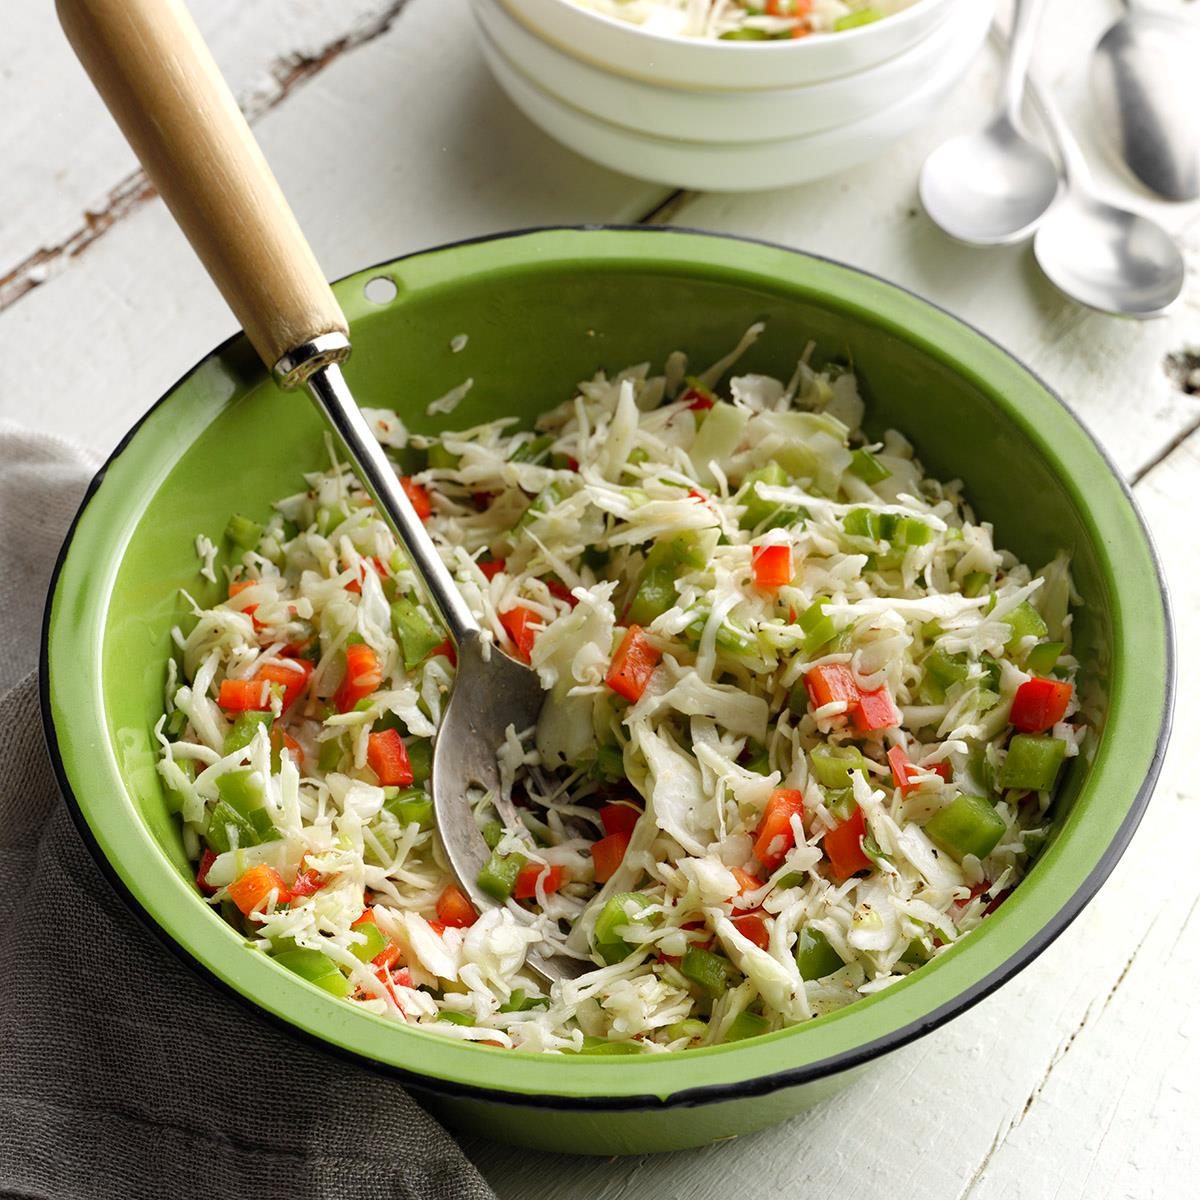 ThreePepper Coleslaw Recipe How to Make It Taste of Home